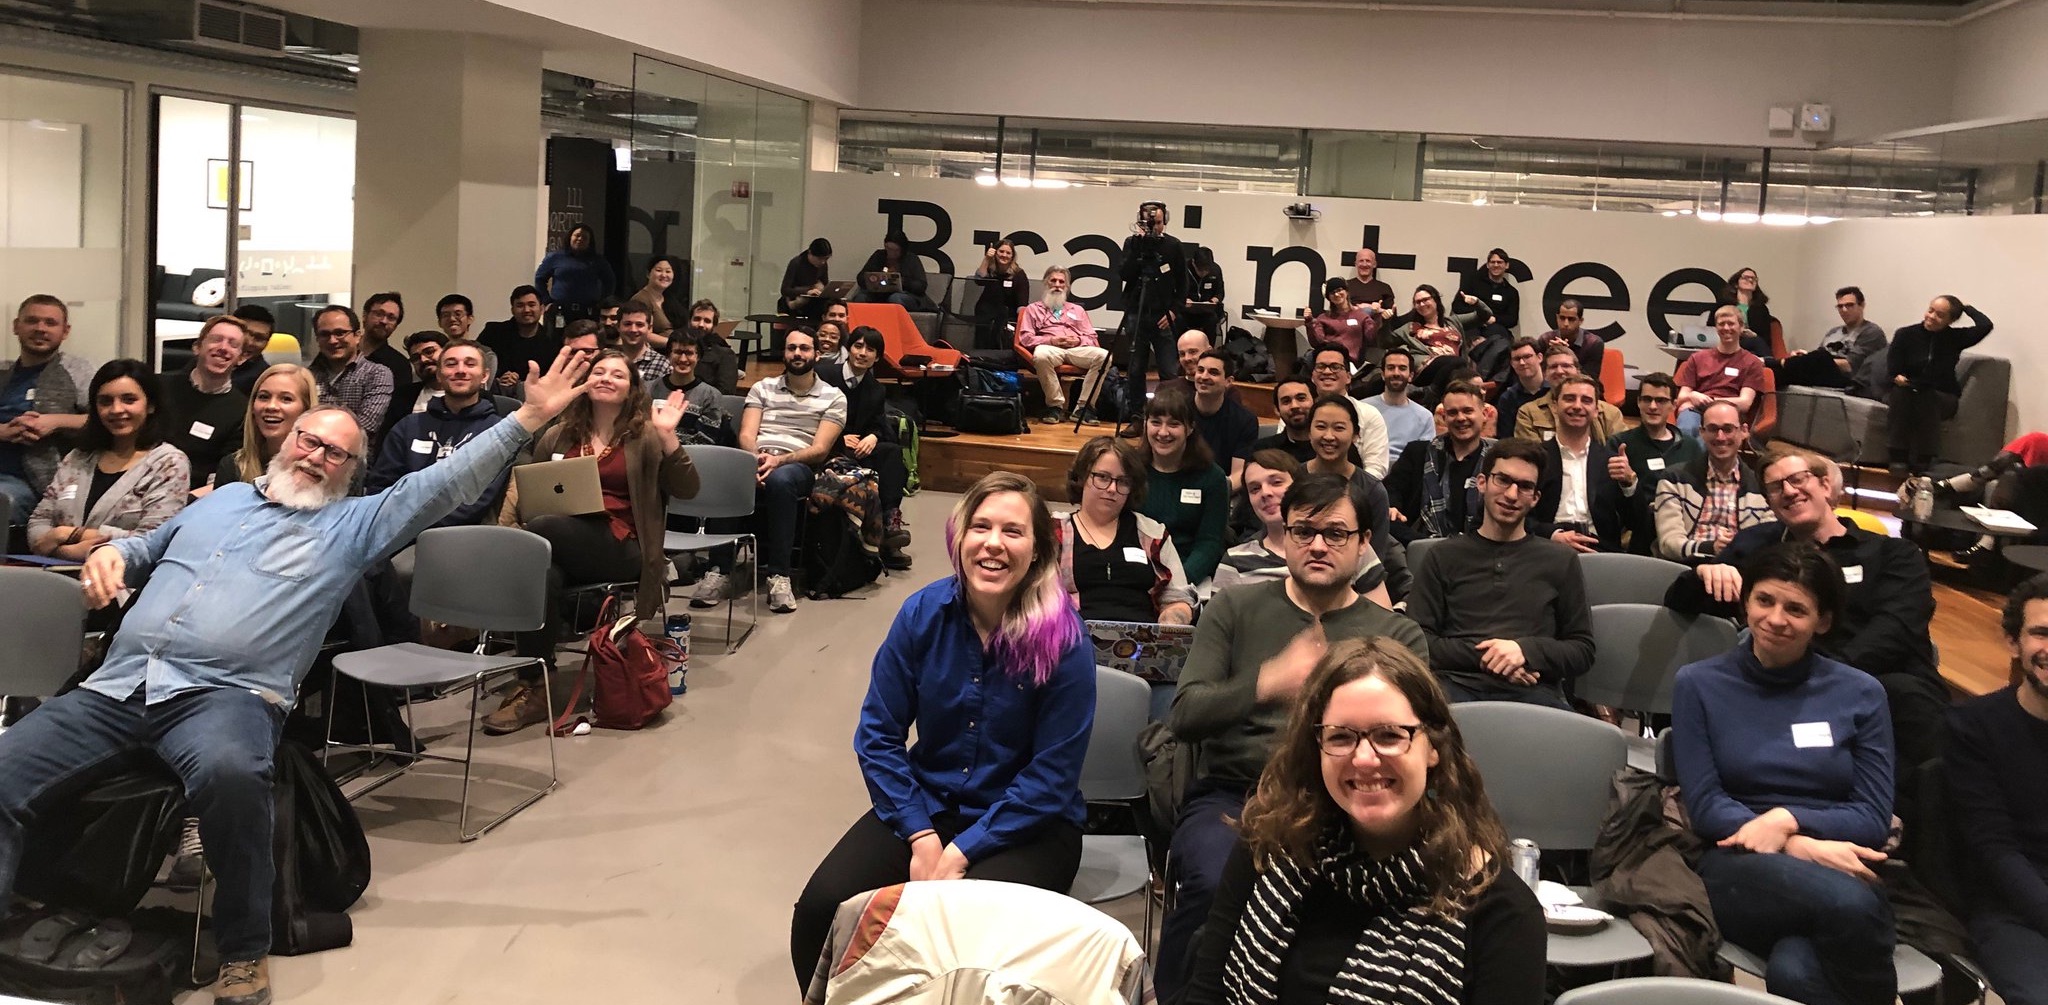 Become one of these smiling people. Be a Chi Hack Night Member!